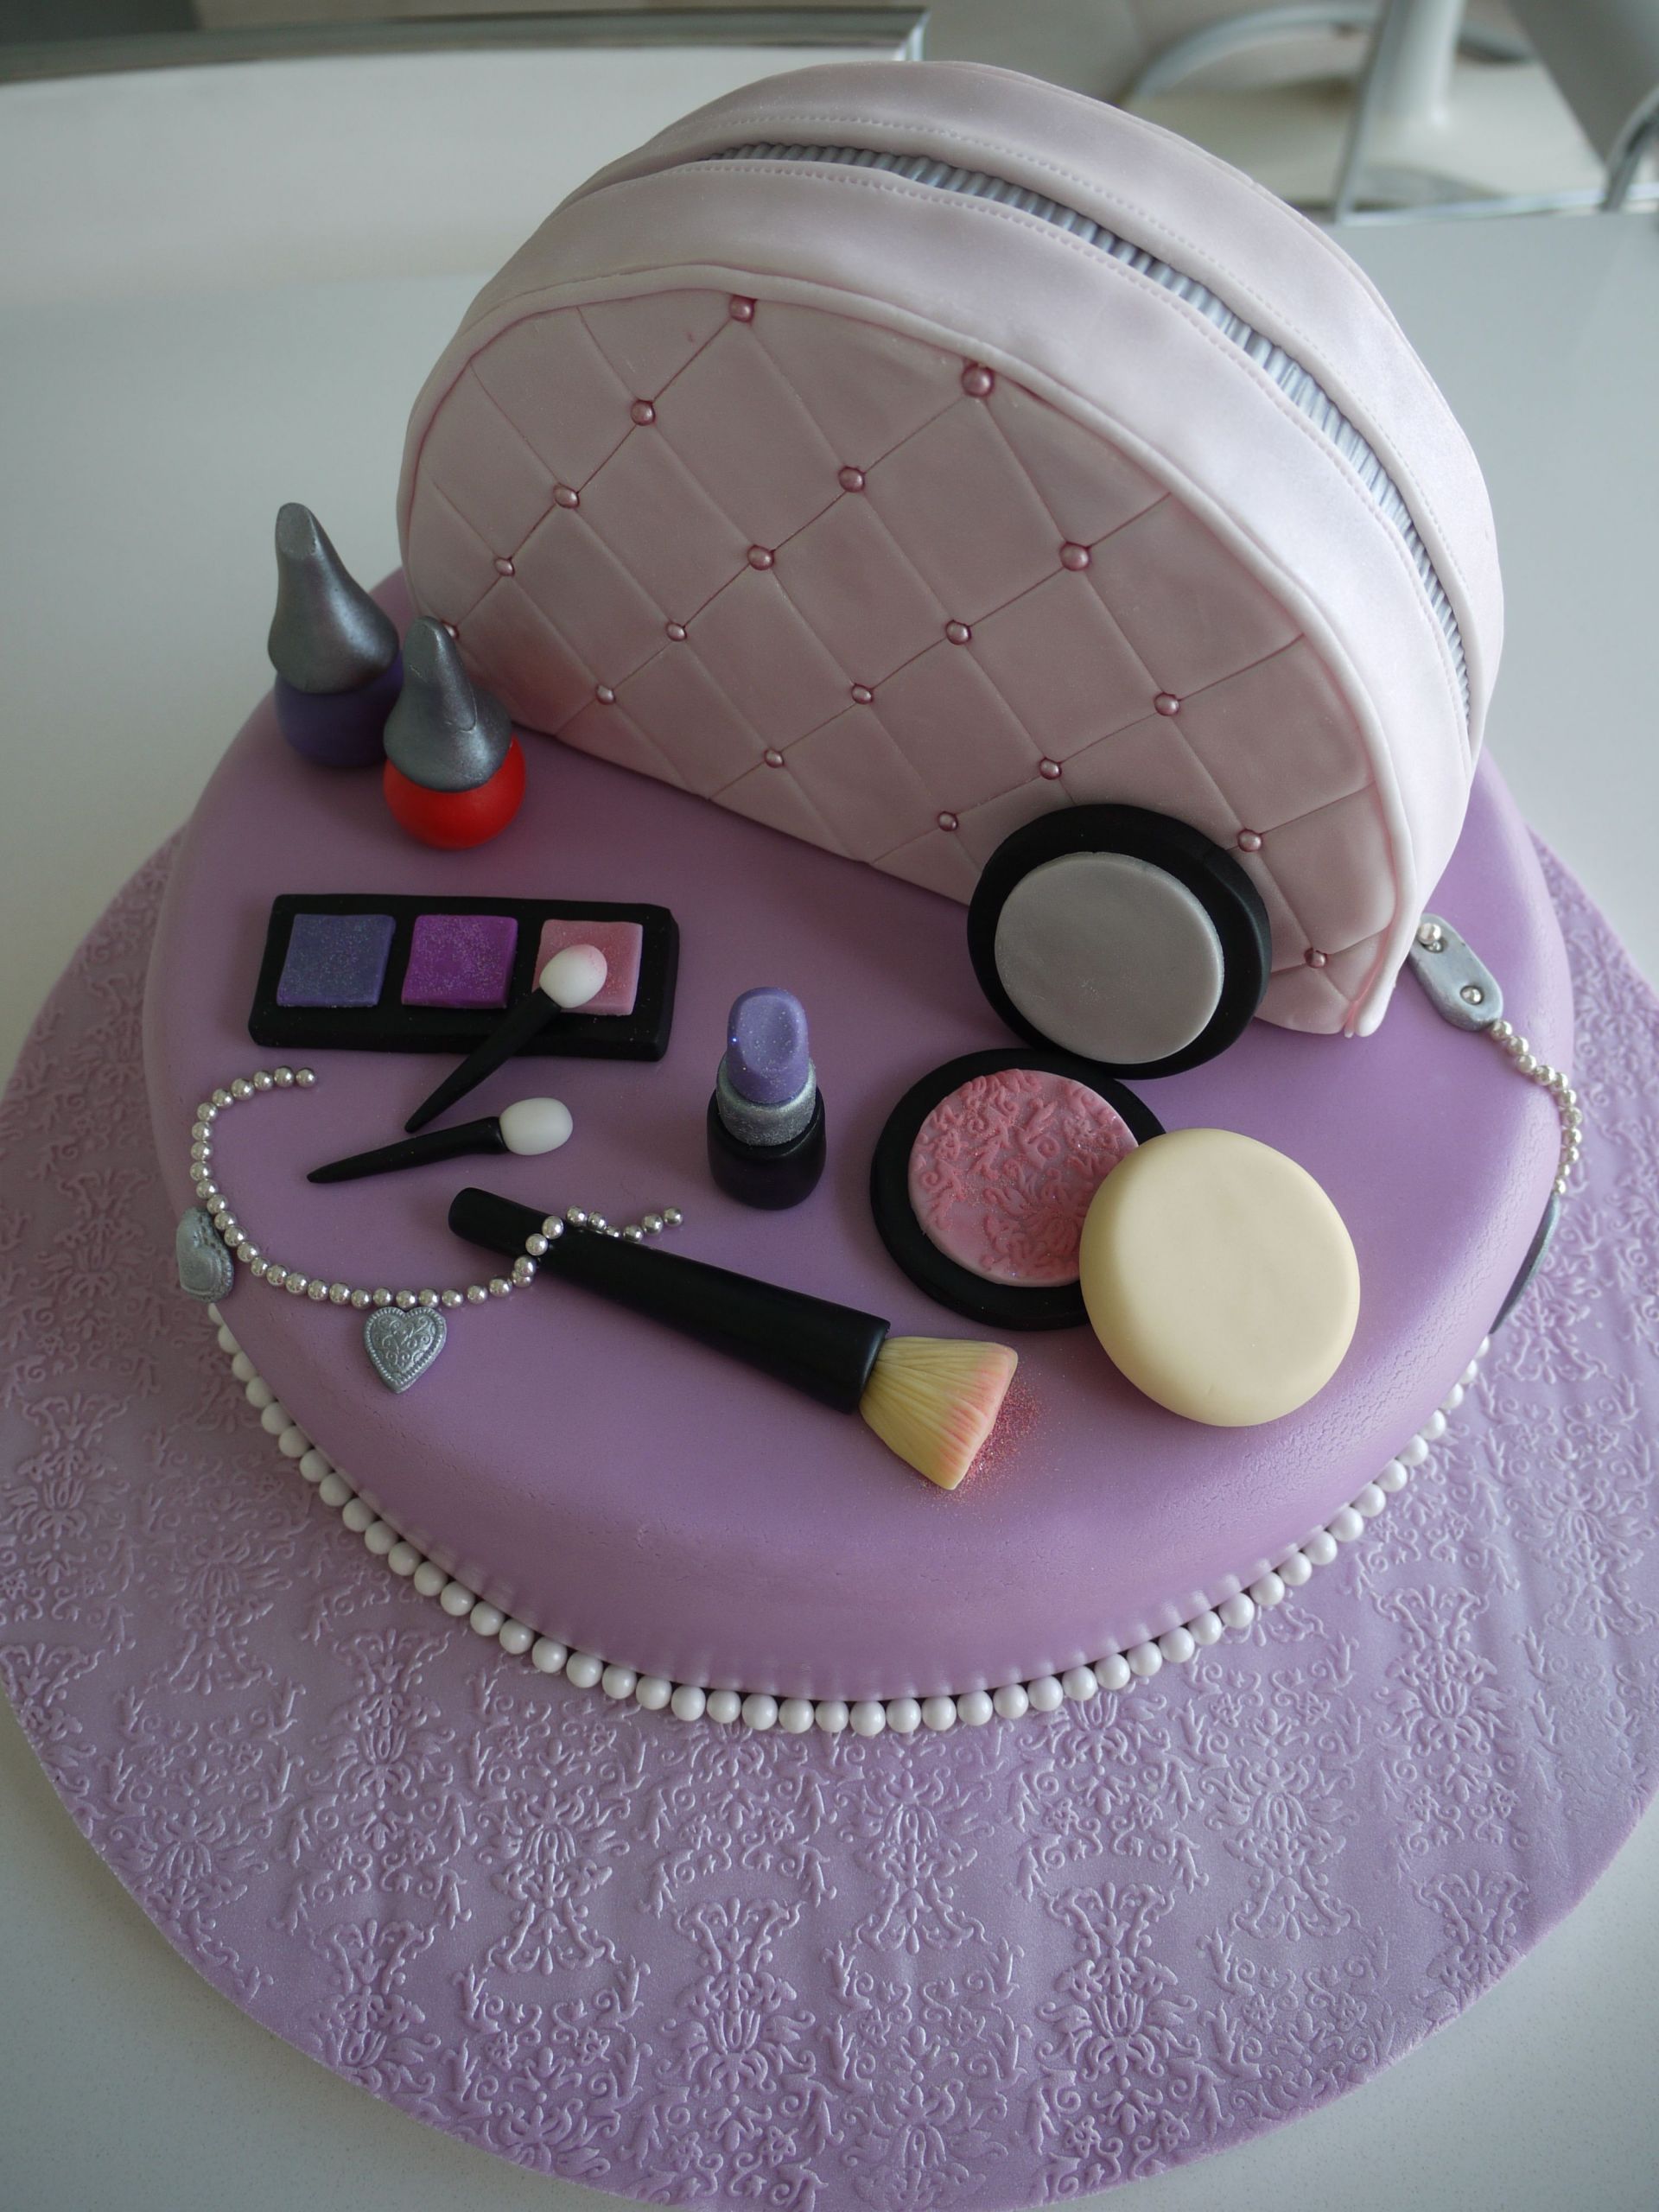 10 Year Old Birthday Cakes
 Vanity case cake This is a vanity case cake for a